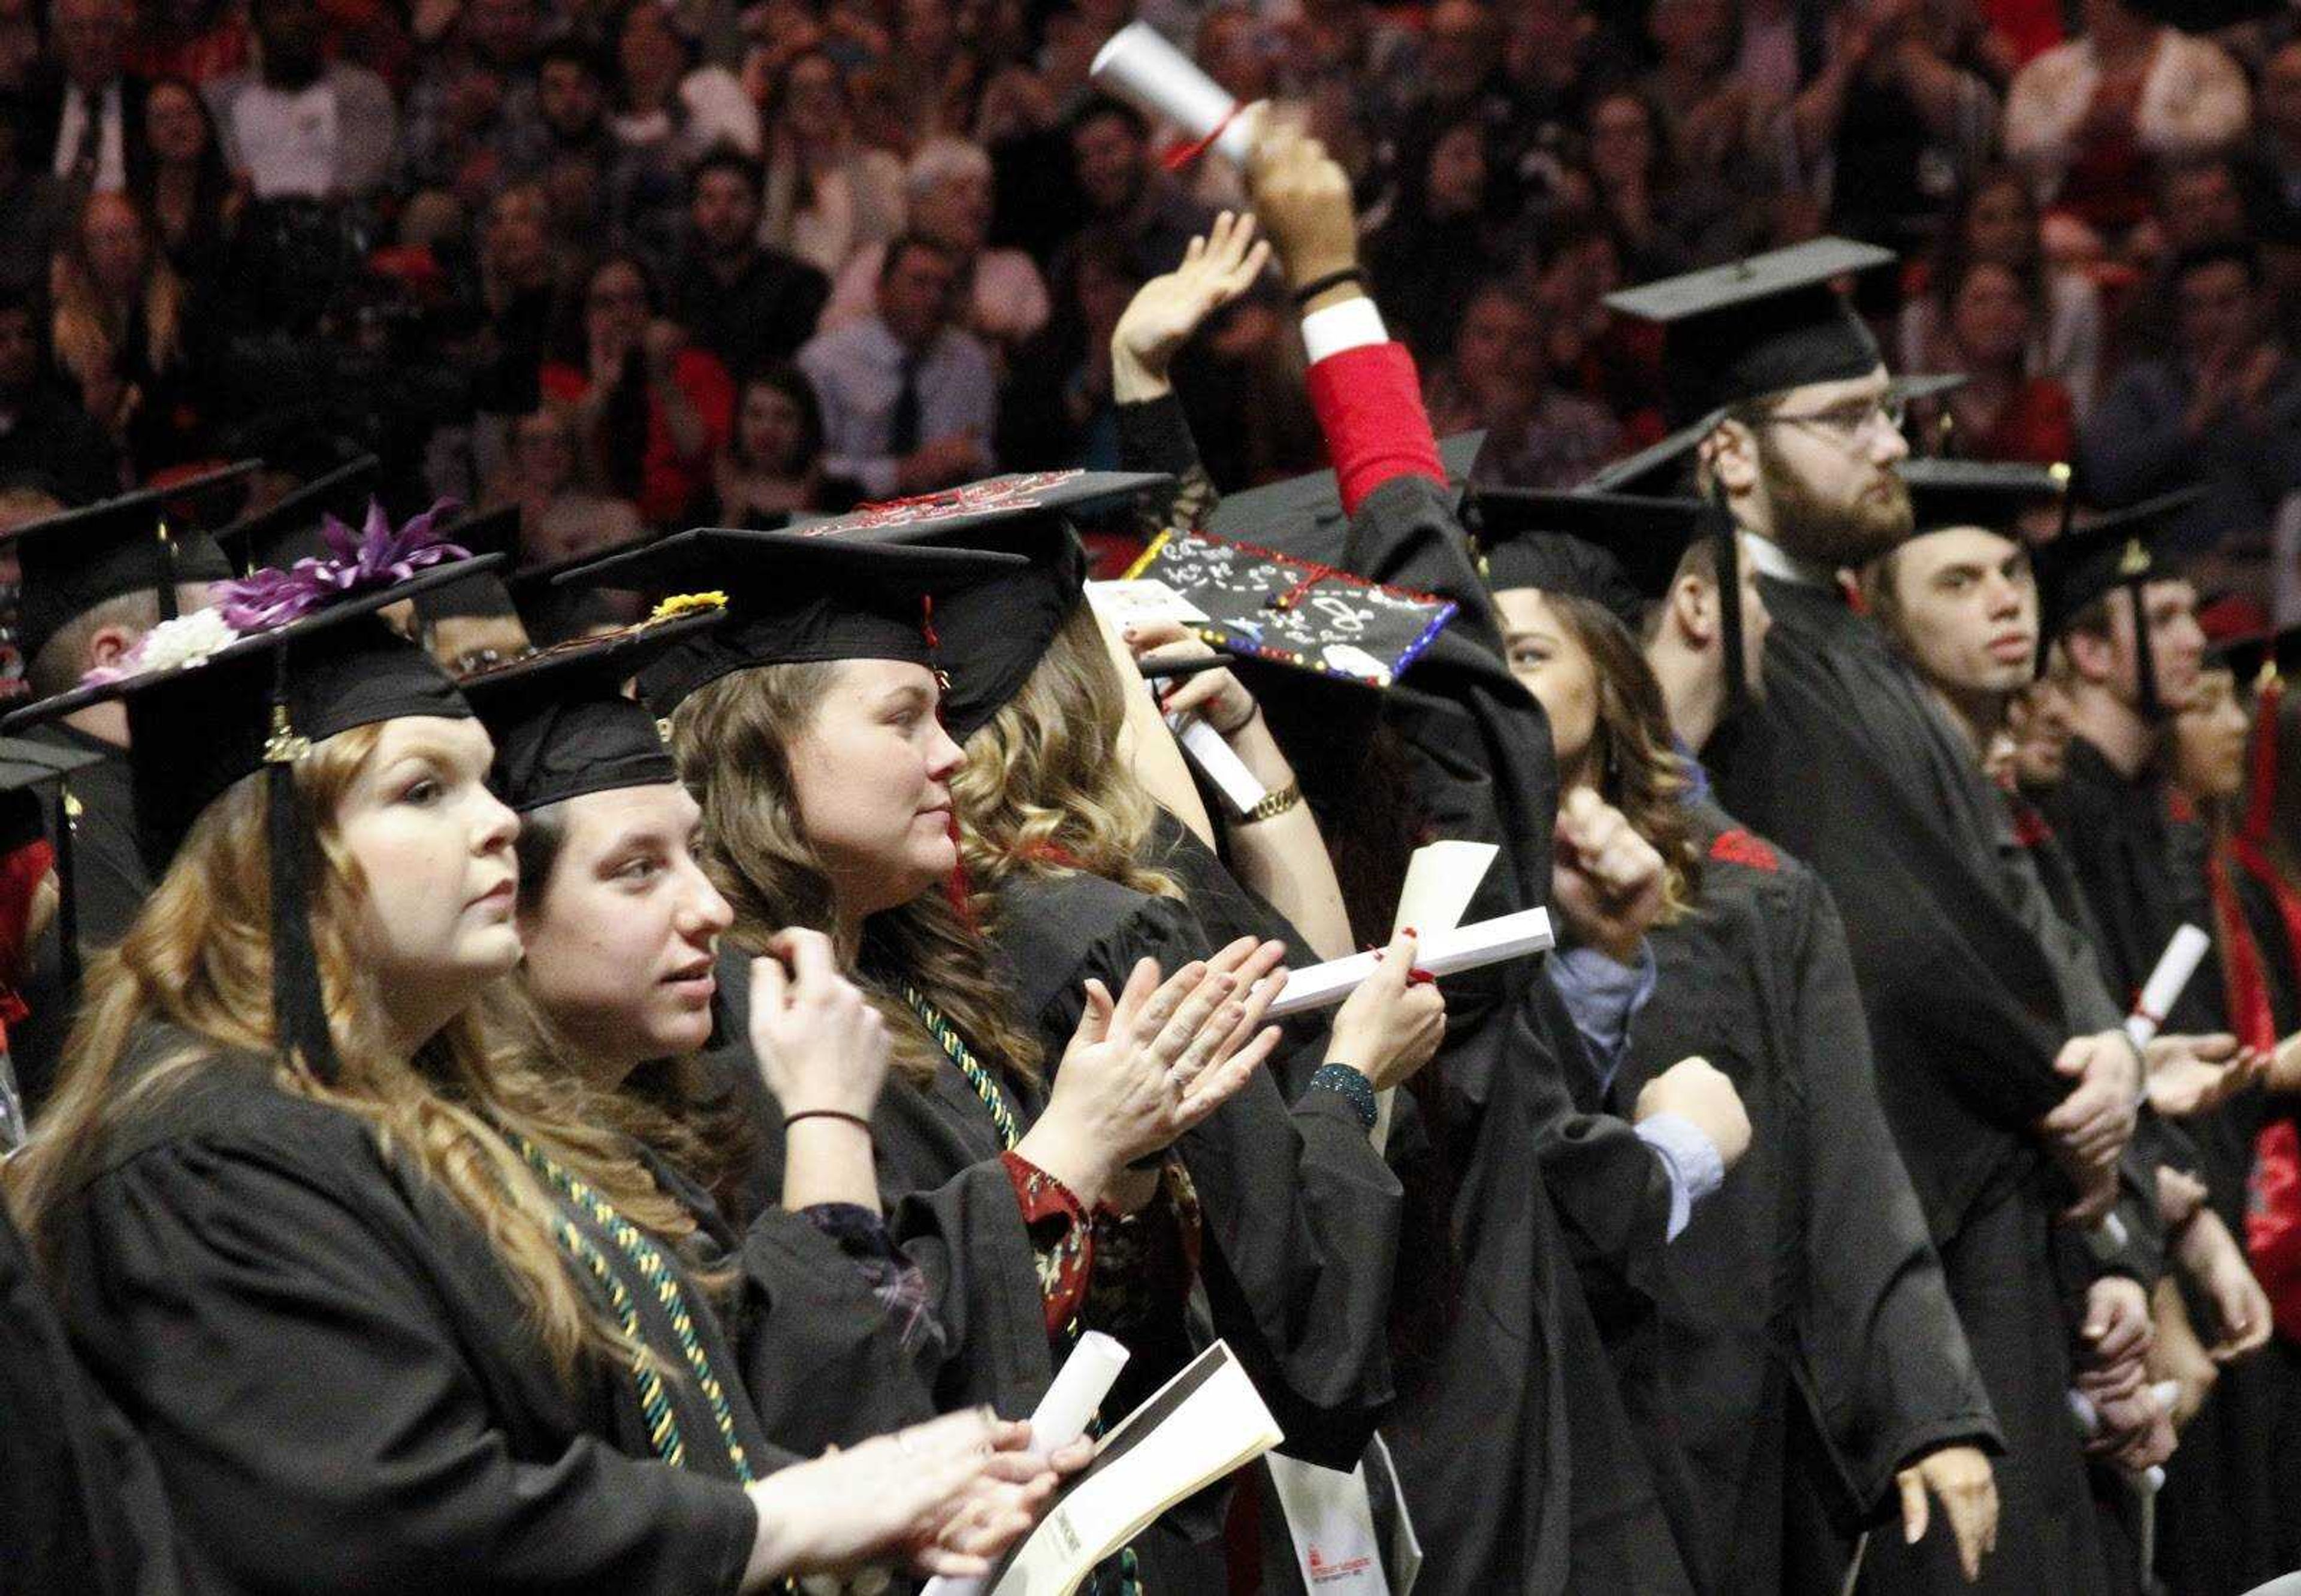 Graduates stand holding their diplomas during the Fall Commencement ceremony Dec. 14 at the Show Me Center in Cape Girardeau, Missouri.